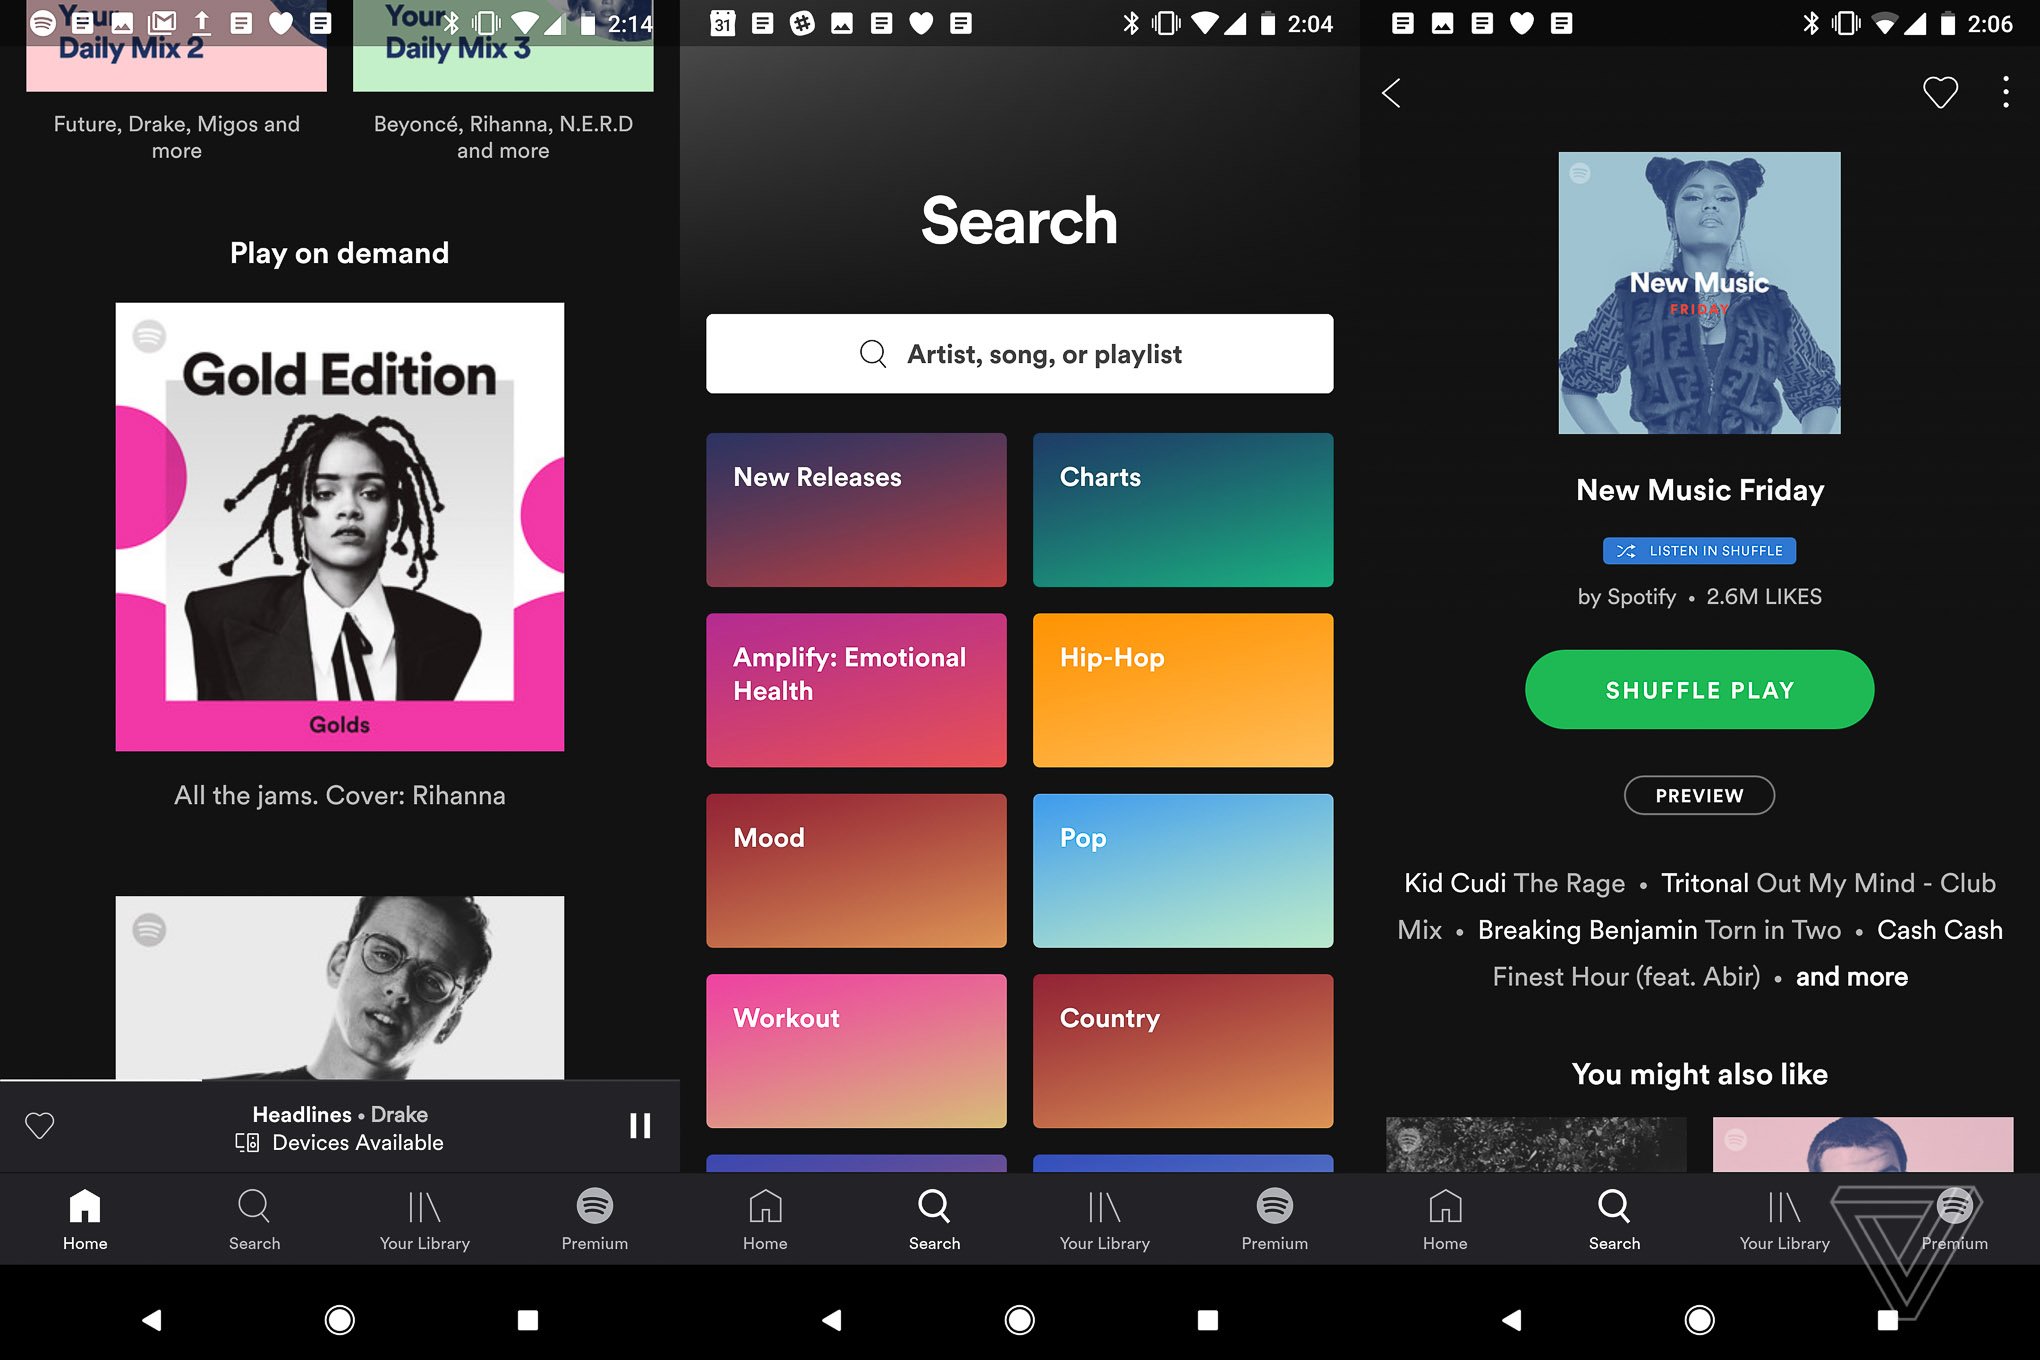 Interfaccia Spotify nuovo iPhone Android 1